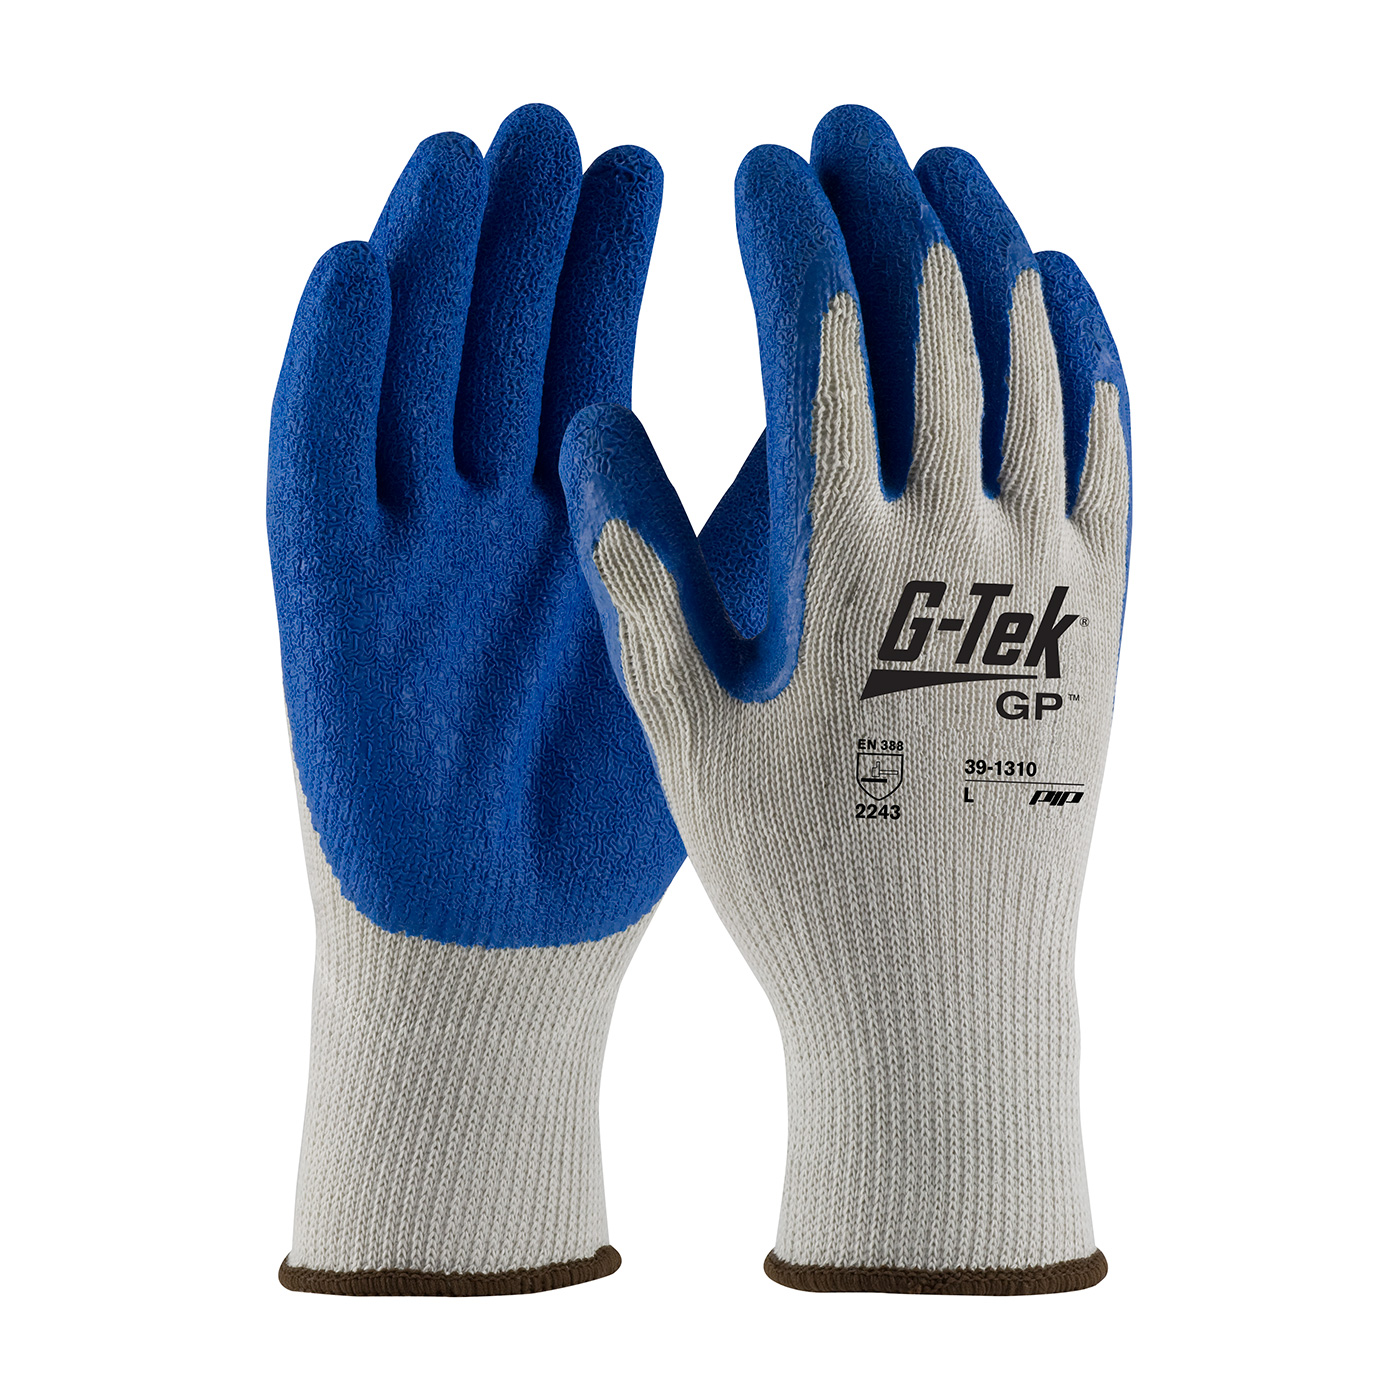 PIP® G-Tek® GP Seamless Knit Cotton / Polyester Glove with Latex Coated Crinkle Grip on Palm & Fingers - Economy Grade #39-1310